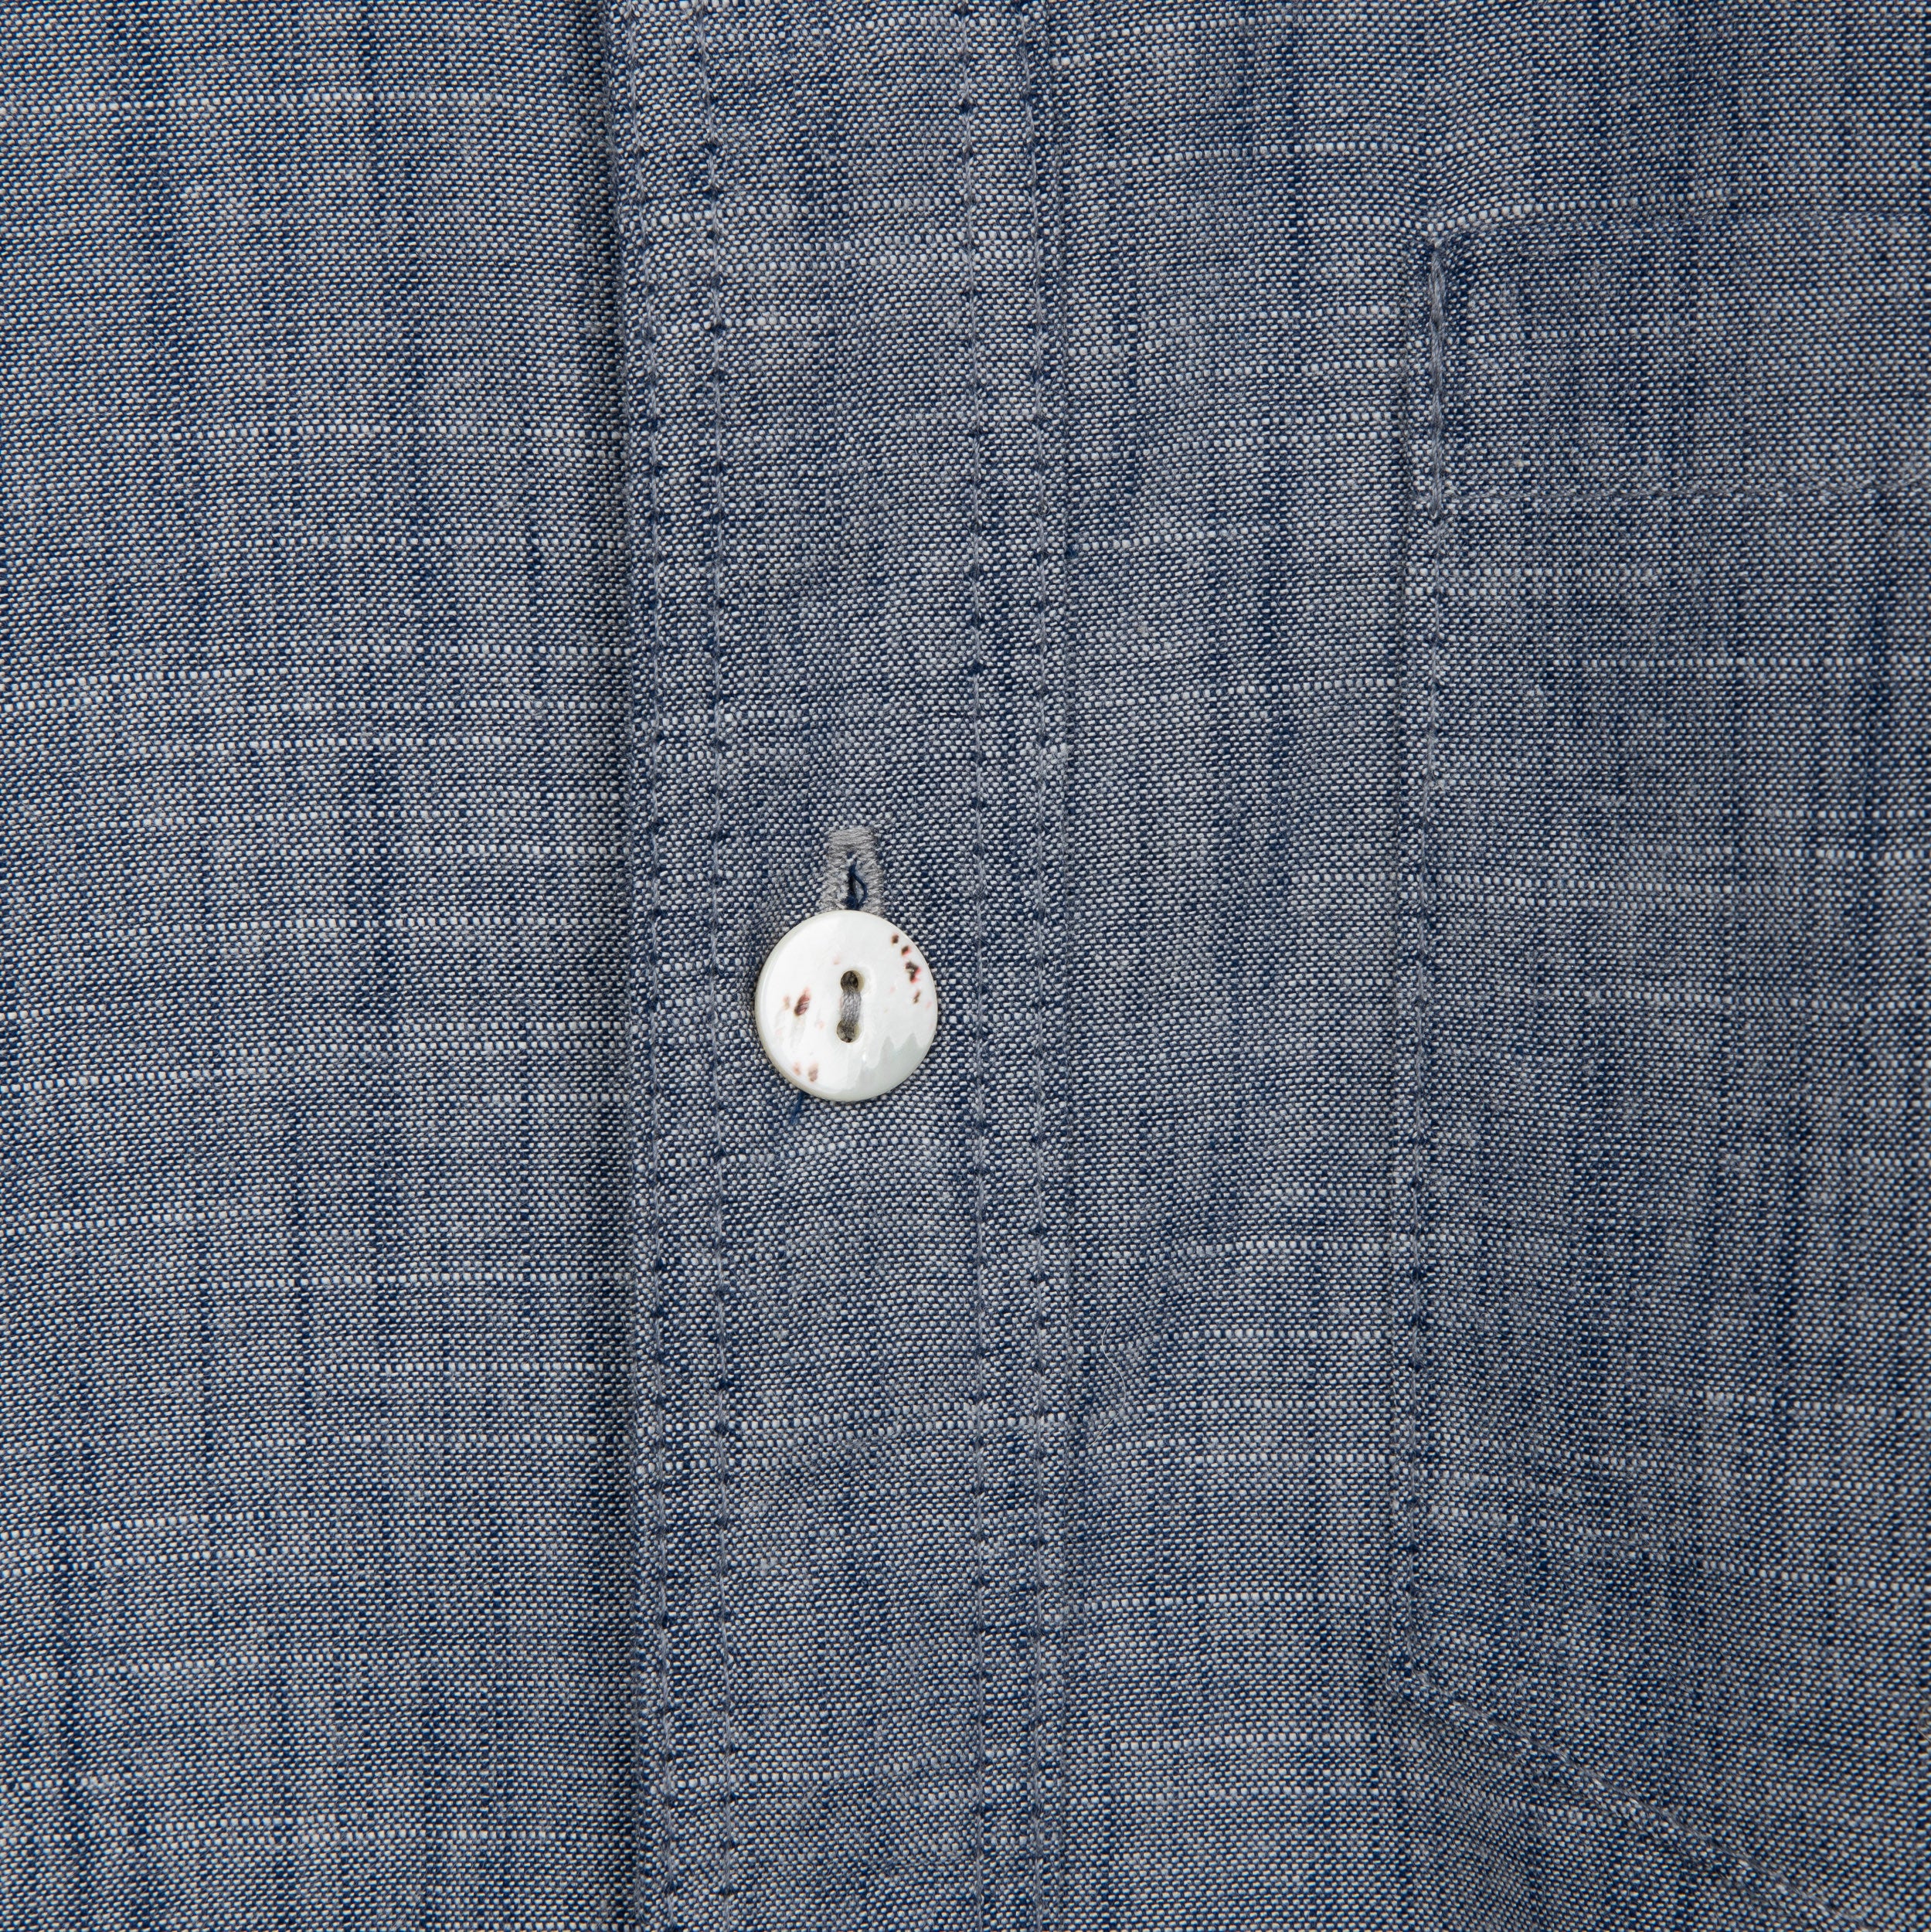 Carrier Company Chambray Shirt